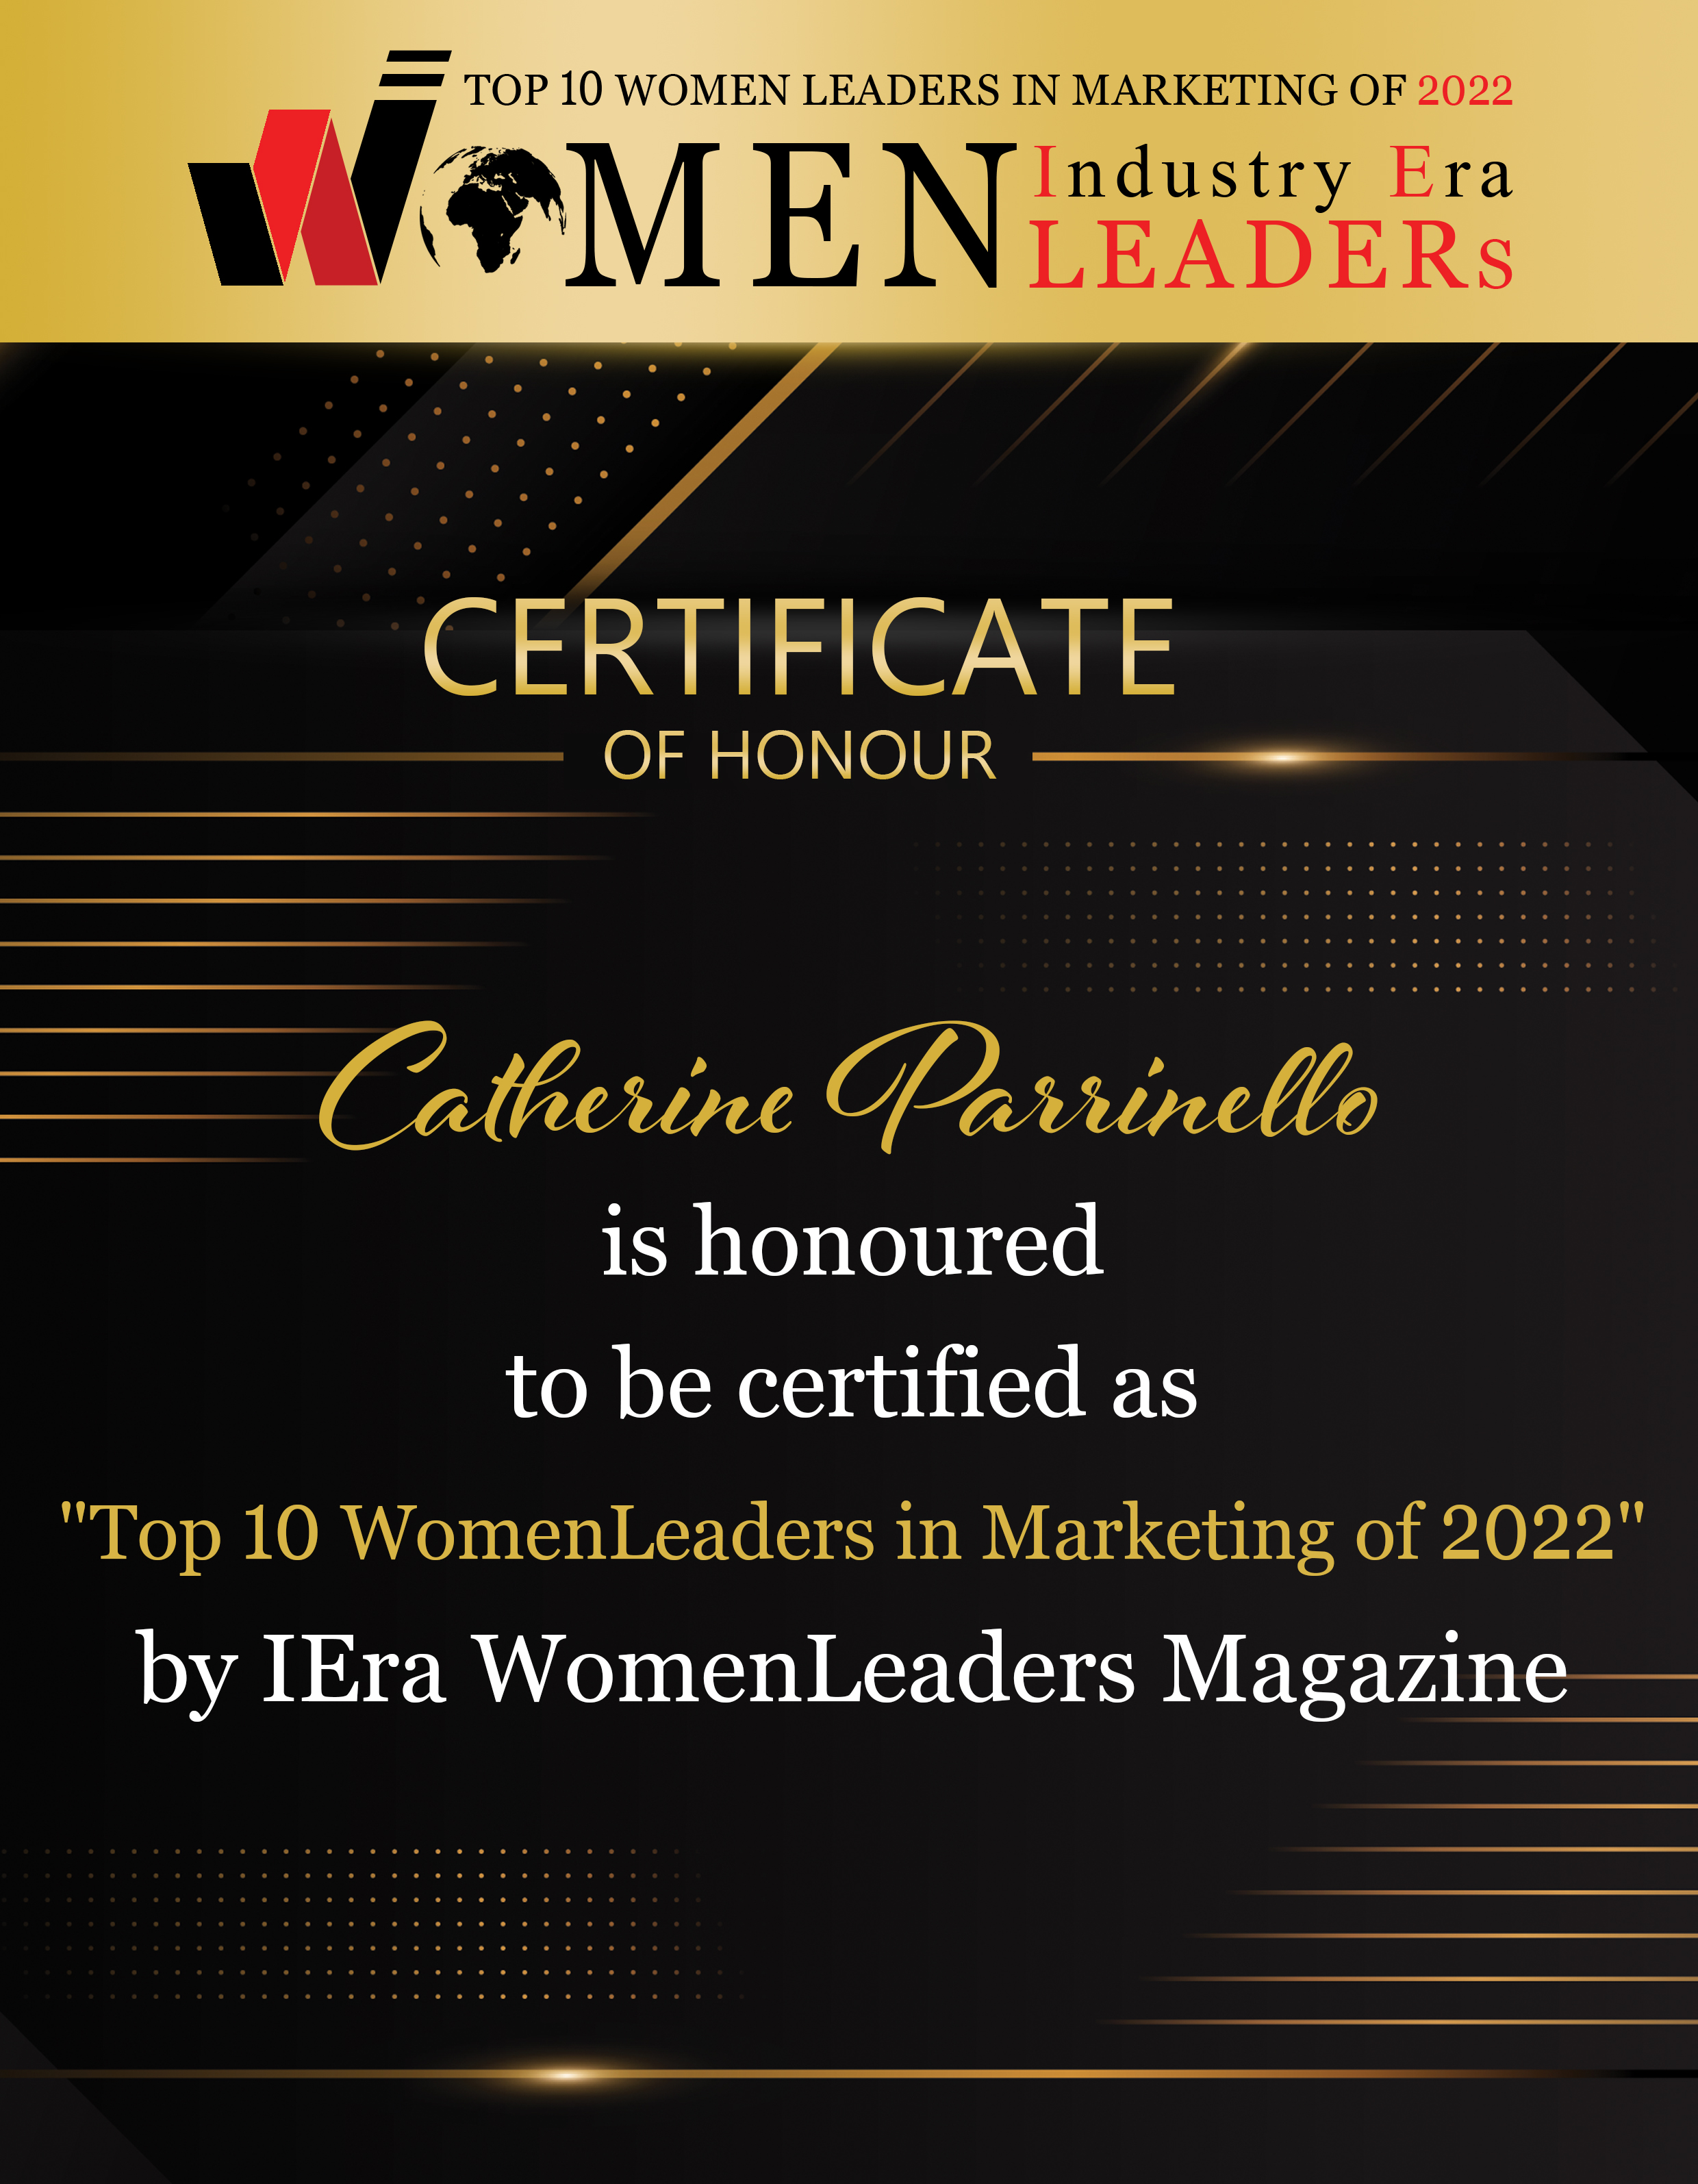 Catherine Parrinello, Chief Operating Officer of Boston Digital, Top 10 Women Leaders in Marketing of 2022